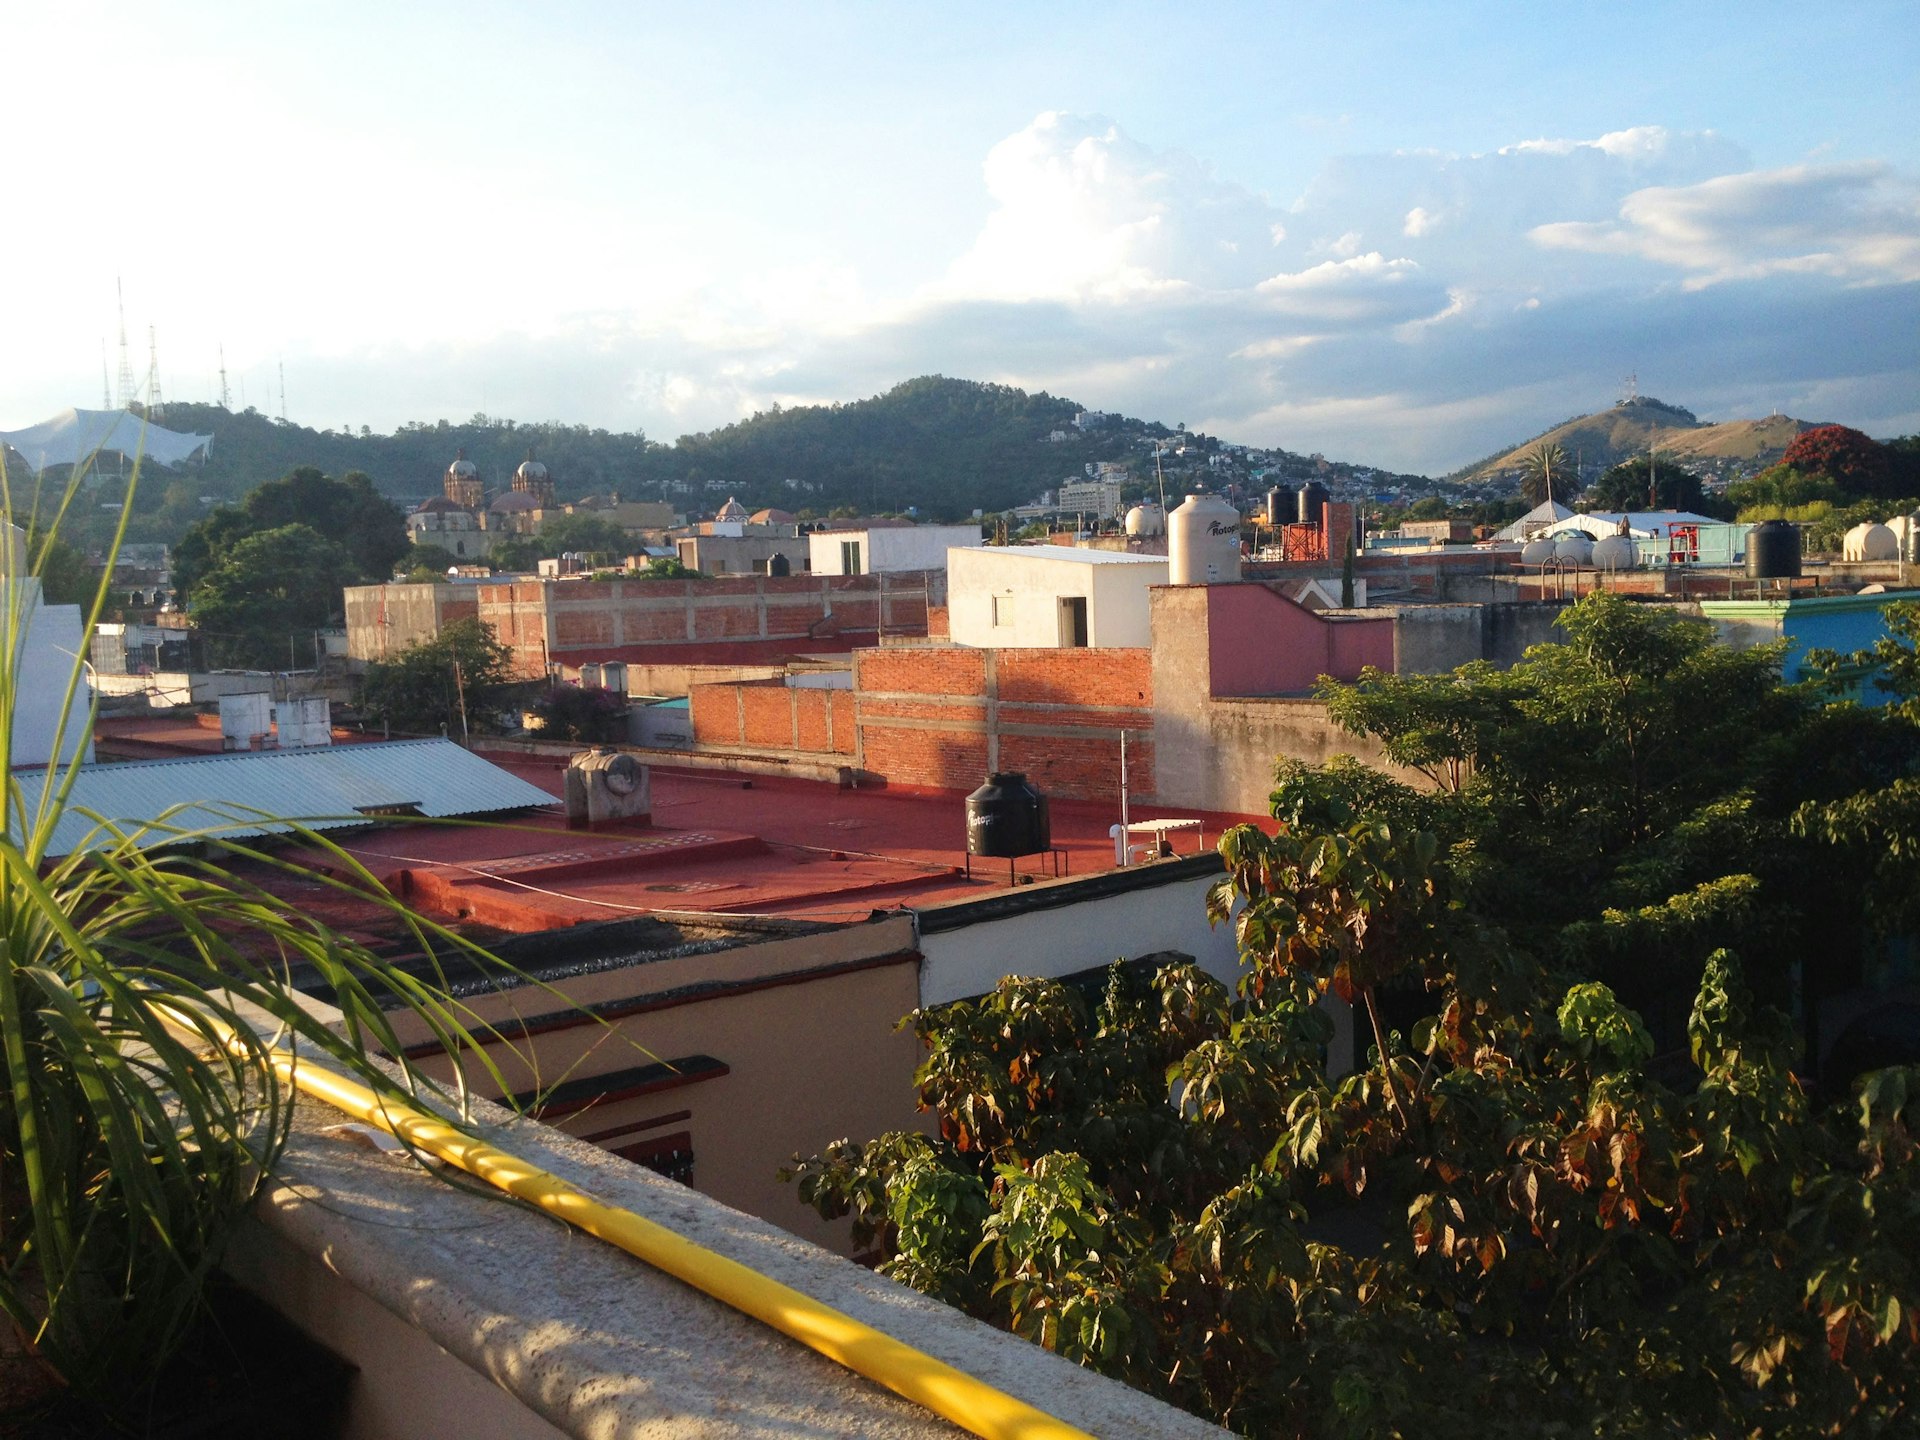 the view from the rooftop patio of Comala with the rooftops of Oaxaca and a mountain in the background